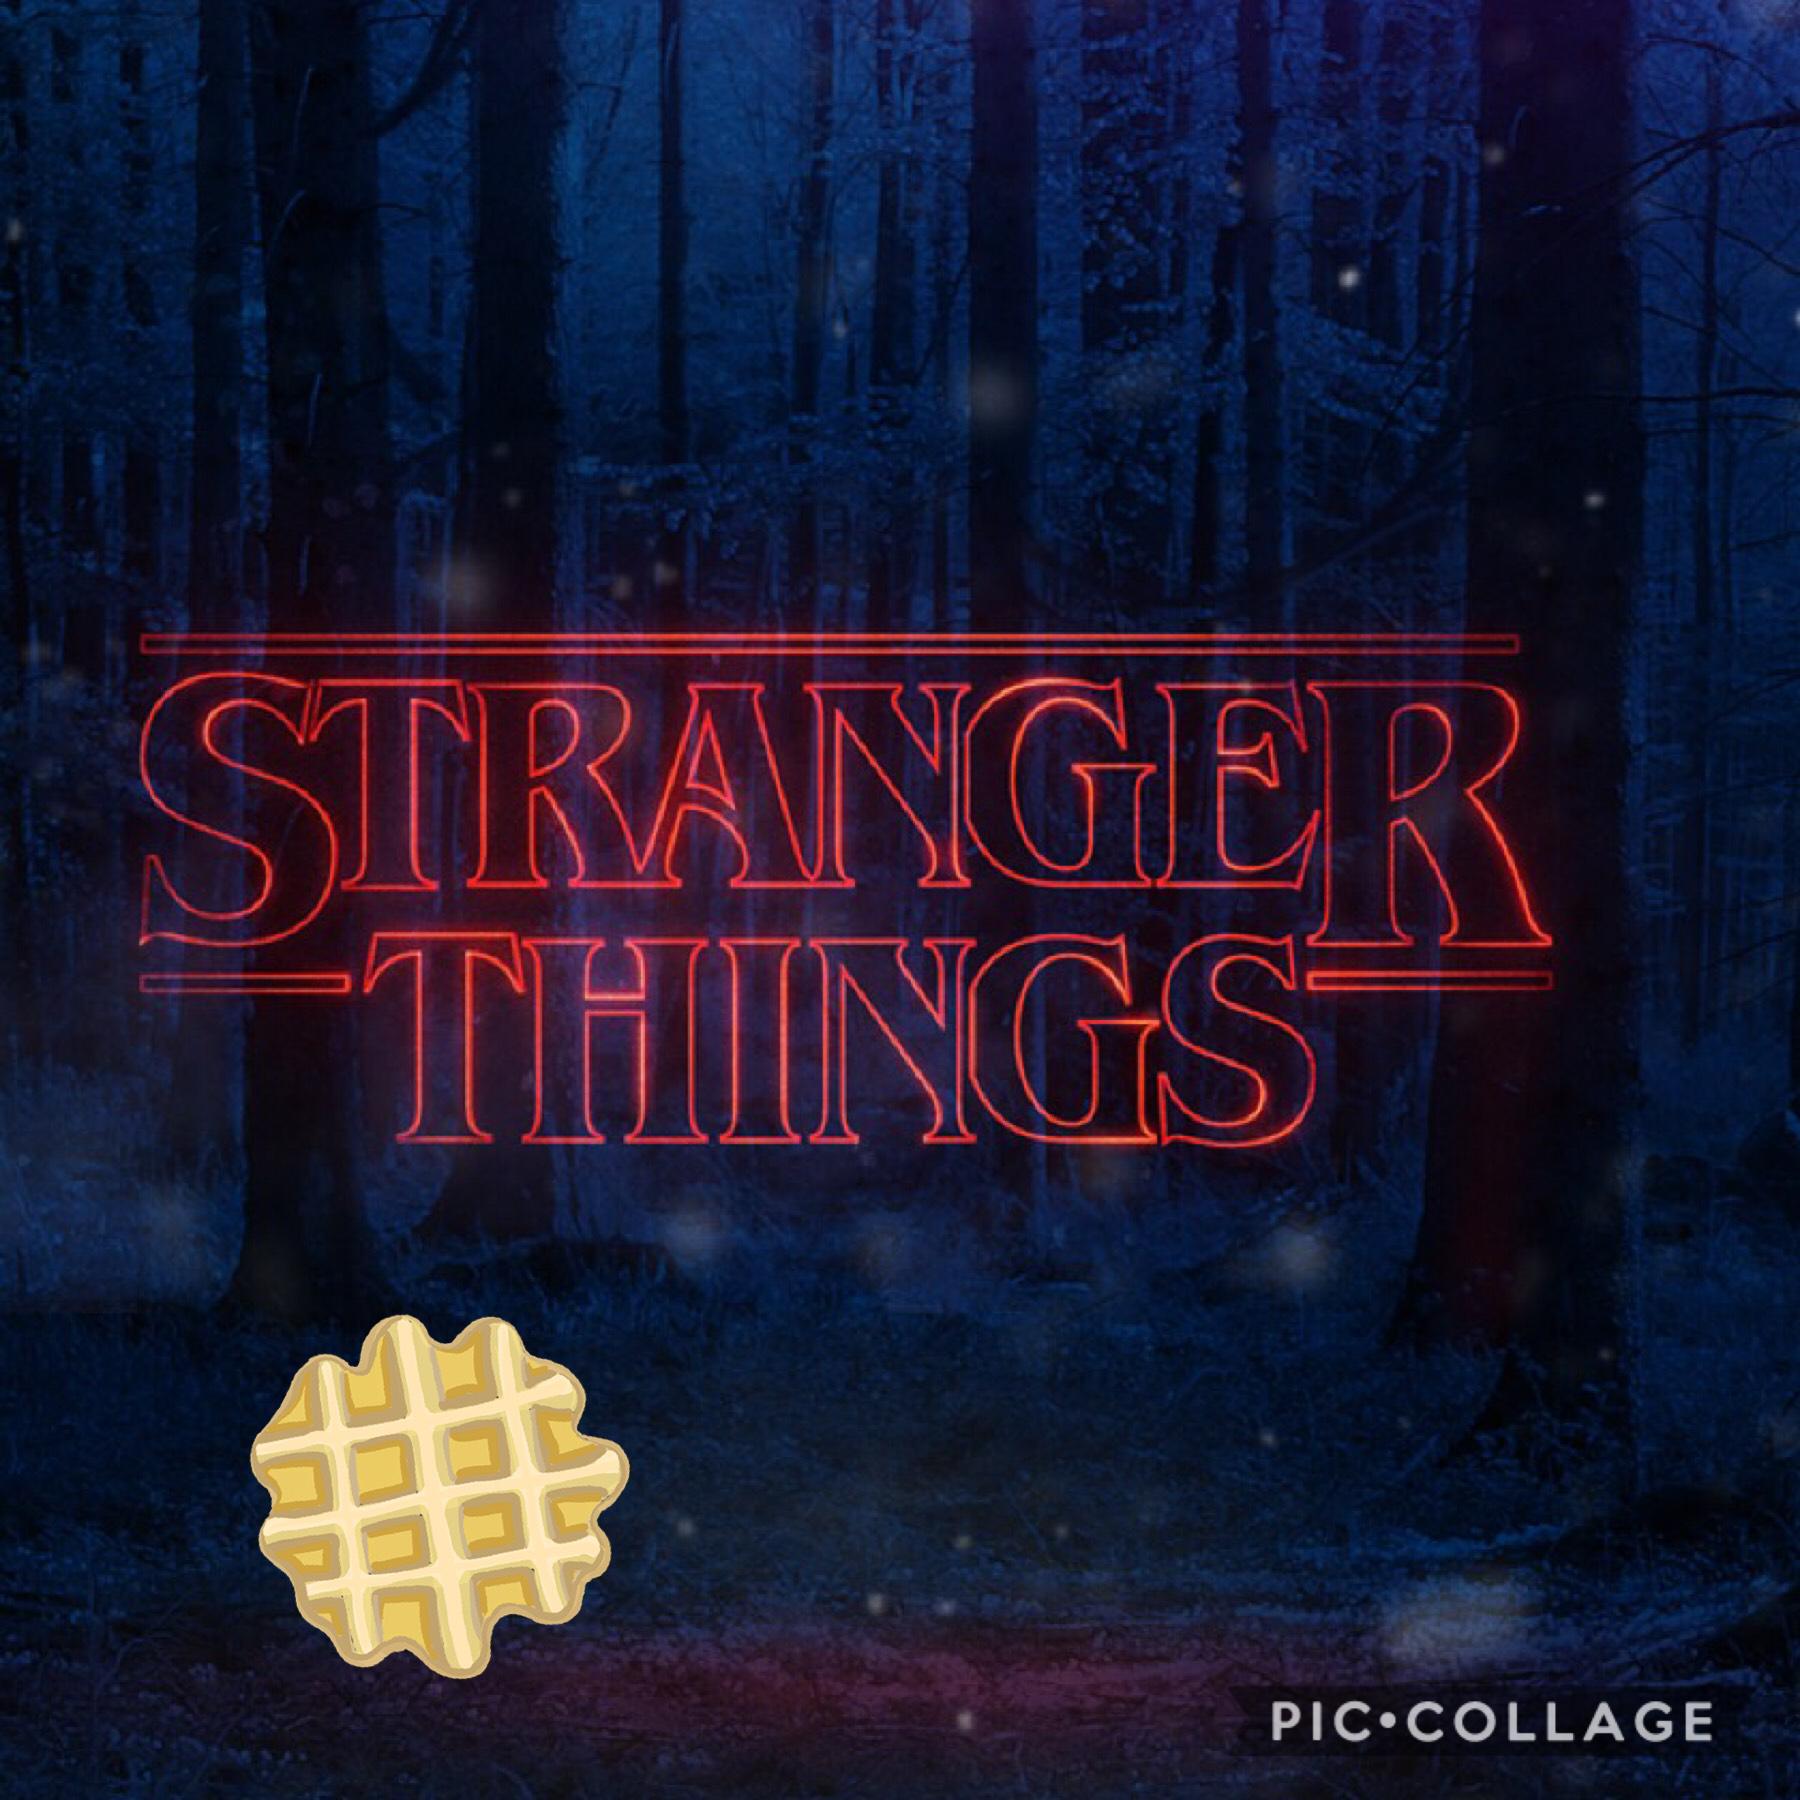           -TAP-
If u watch Stranger Things like this and leave a comment Down below of ur favorite saying
Mine is “ What’d I do “
LMBO 
Subscribe 
Like 
And
Comment 